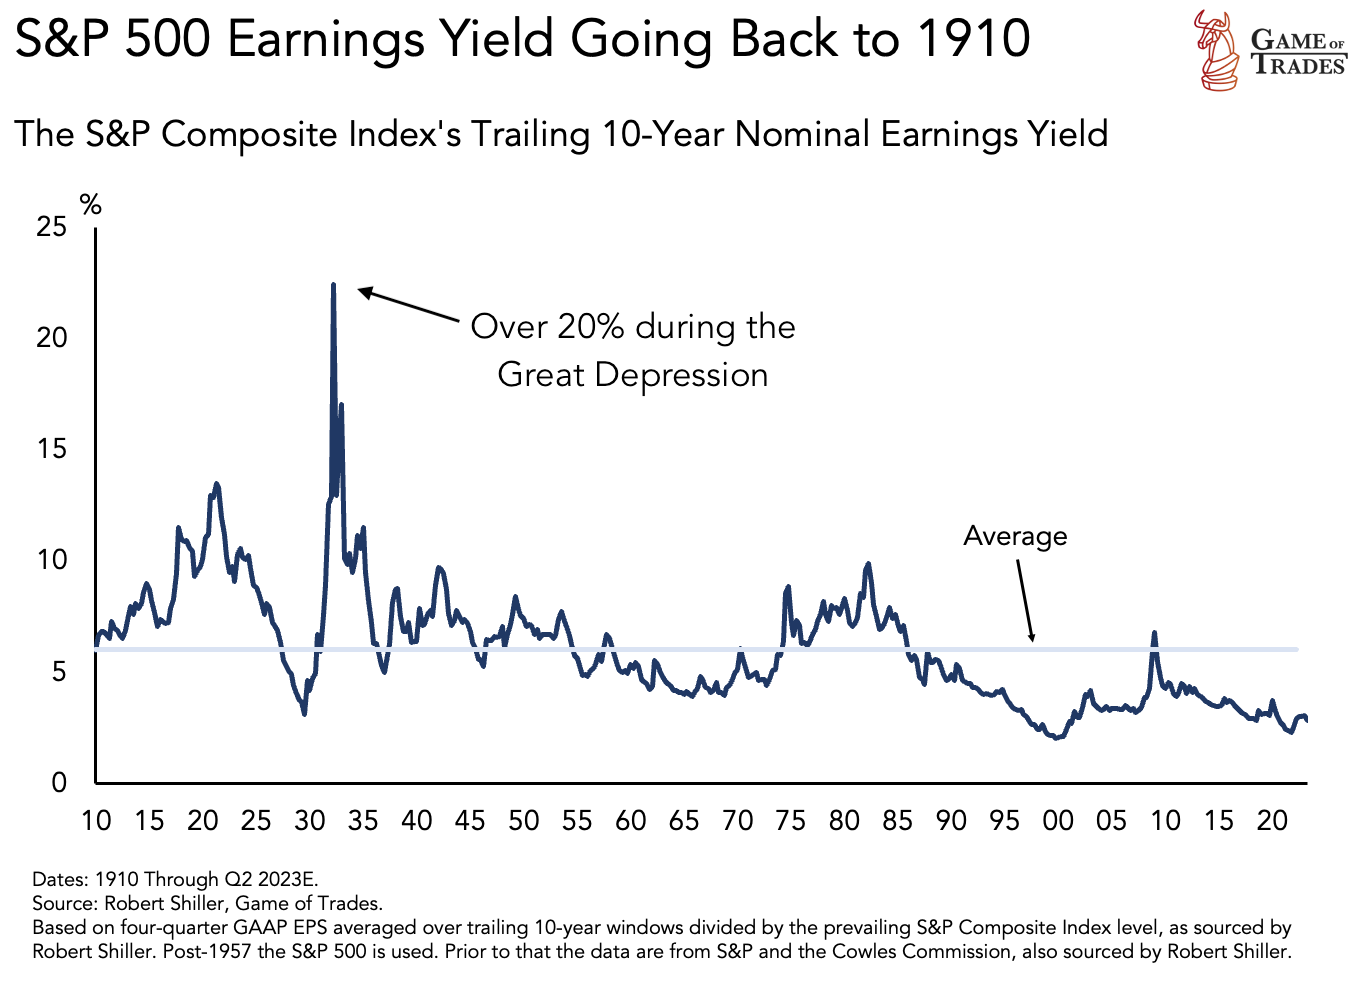 S&P 500 Earnings Yield Going Back to 1910